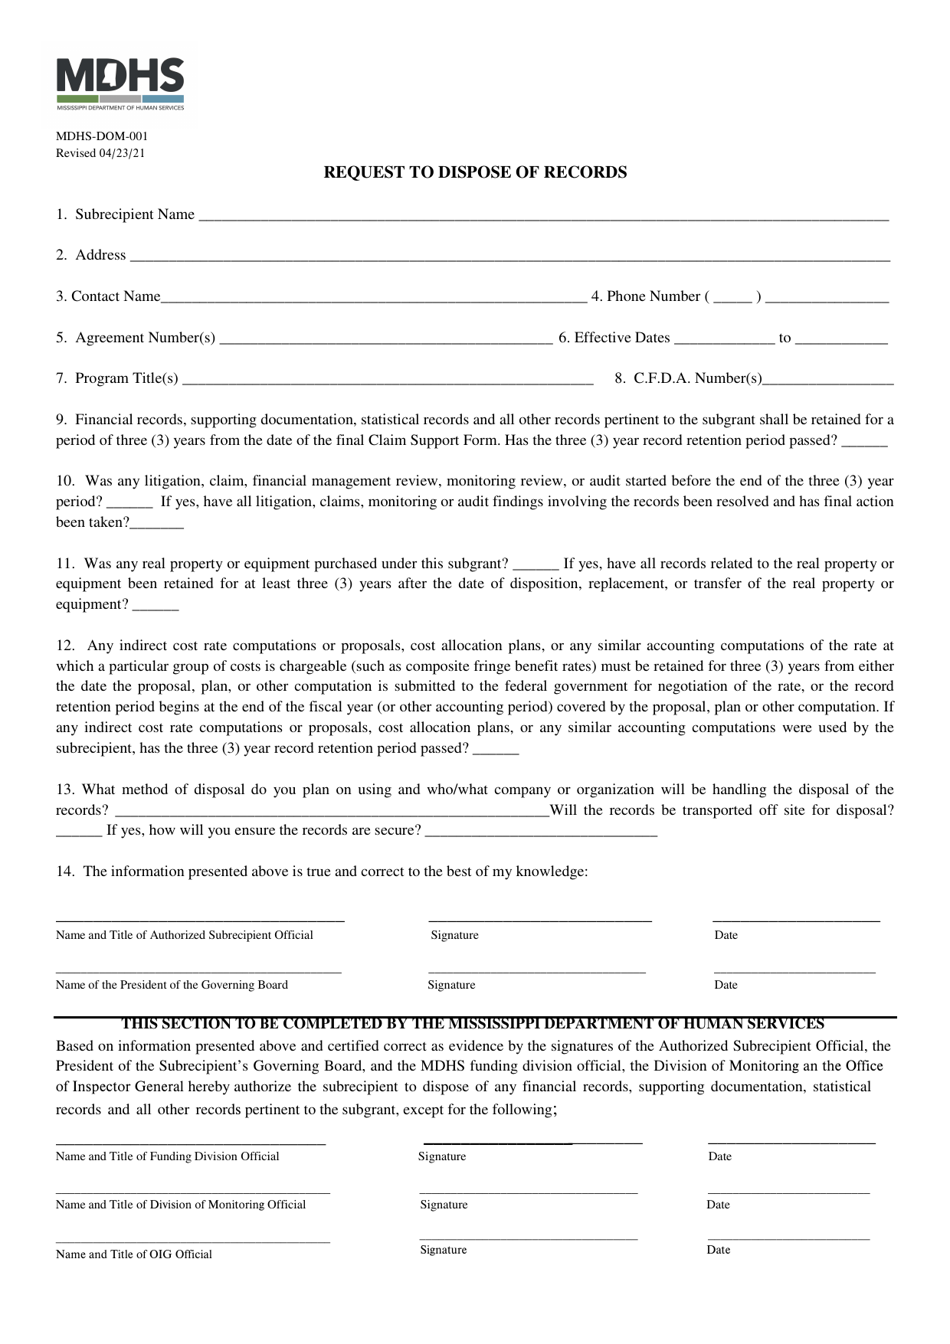 Form MDHS-DOM-001 Request to Dispose of Records - Mississippi, Page 1